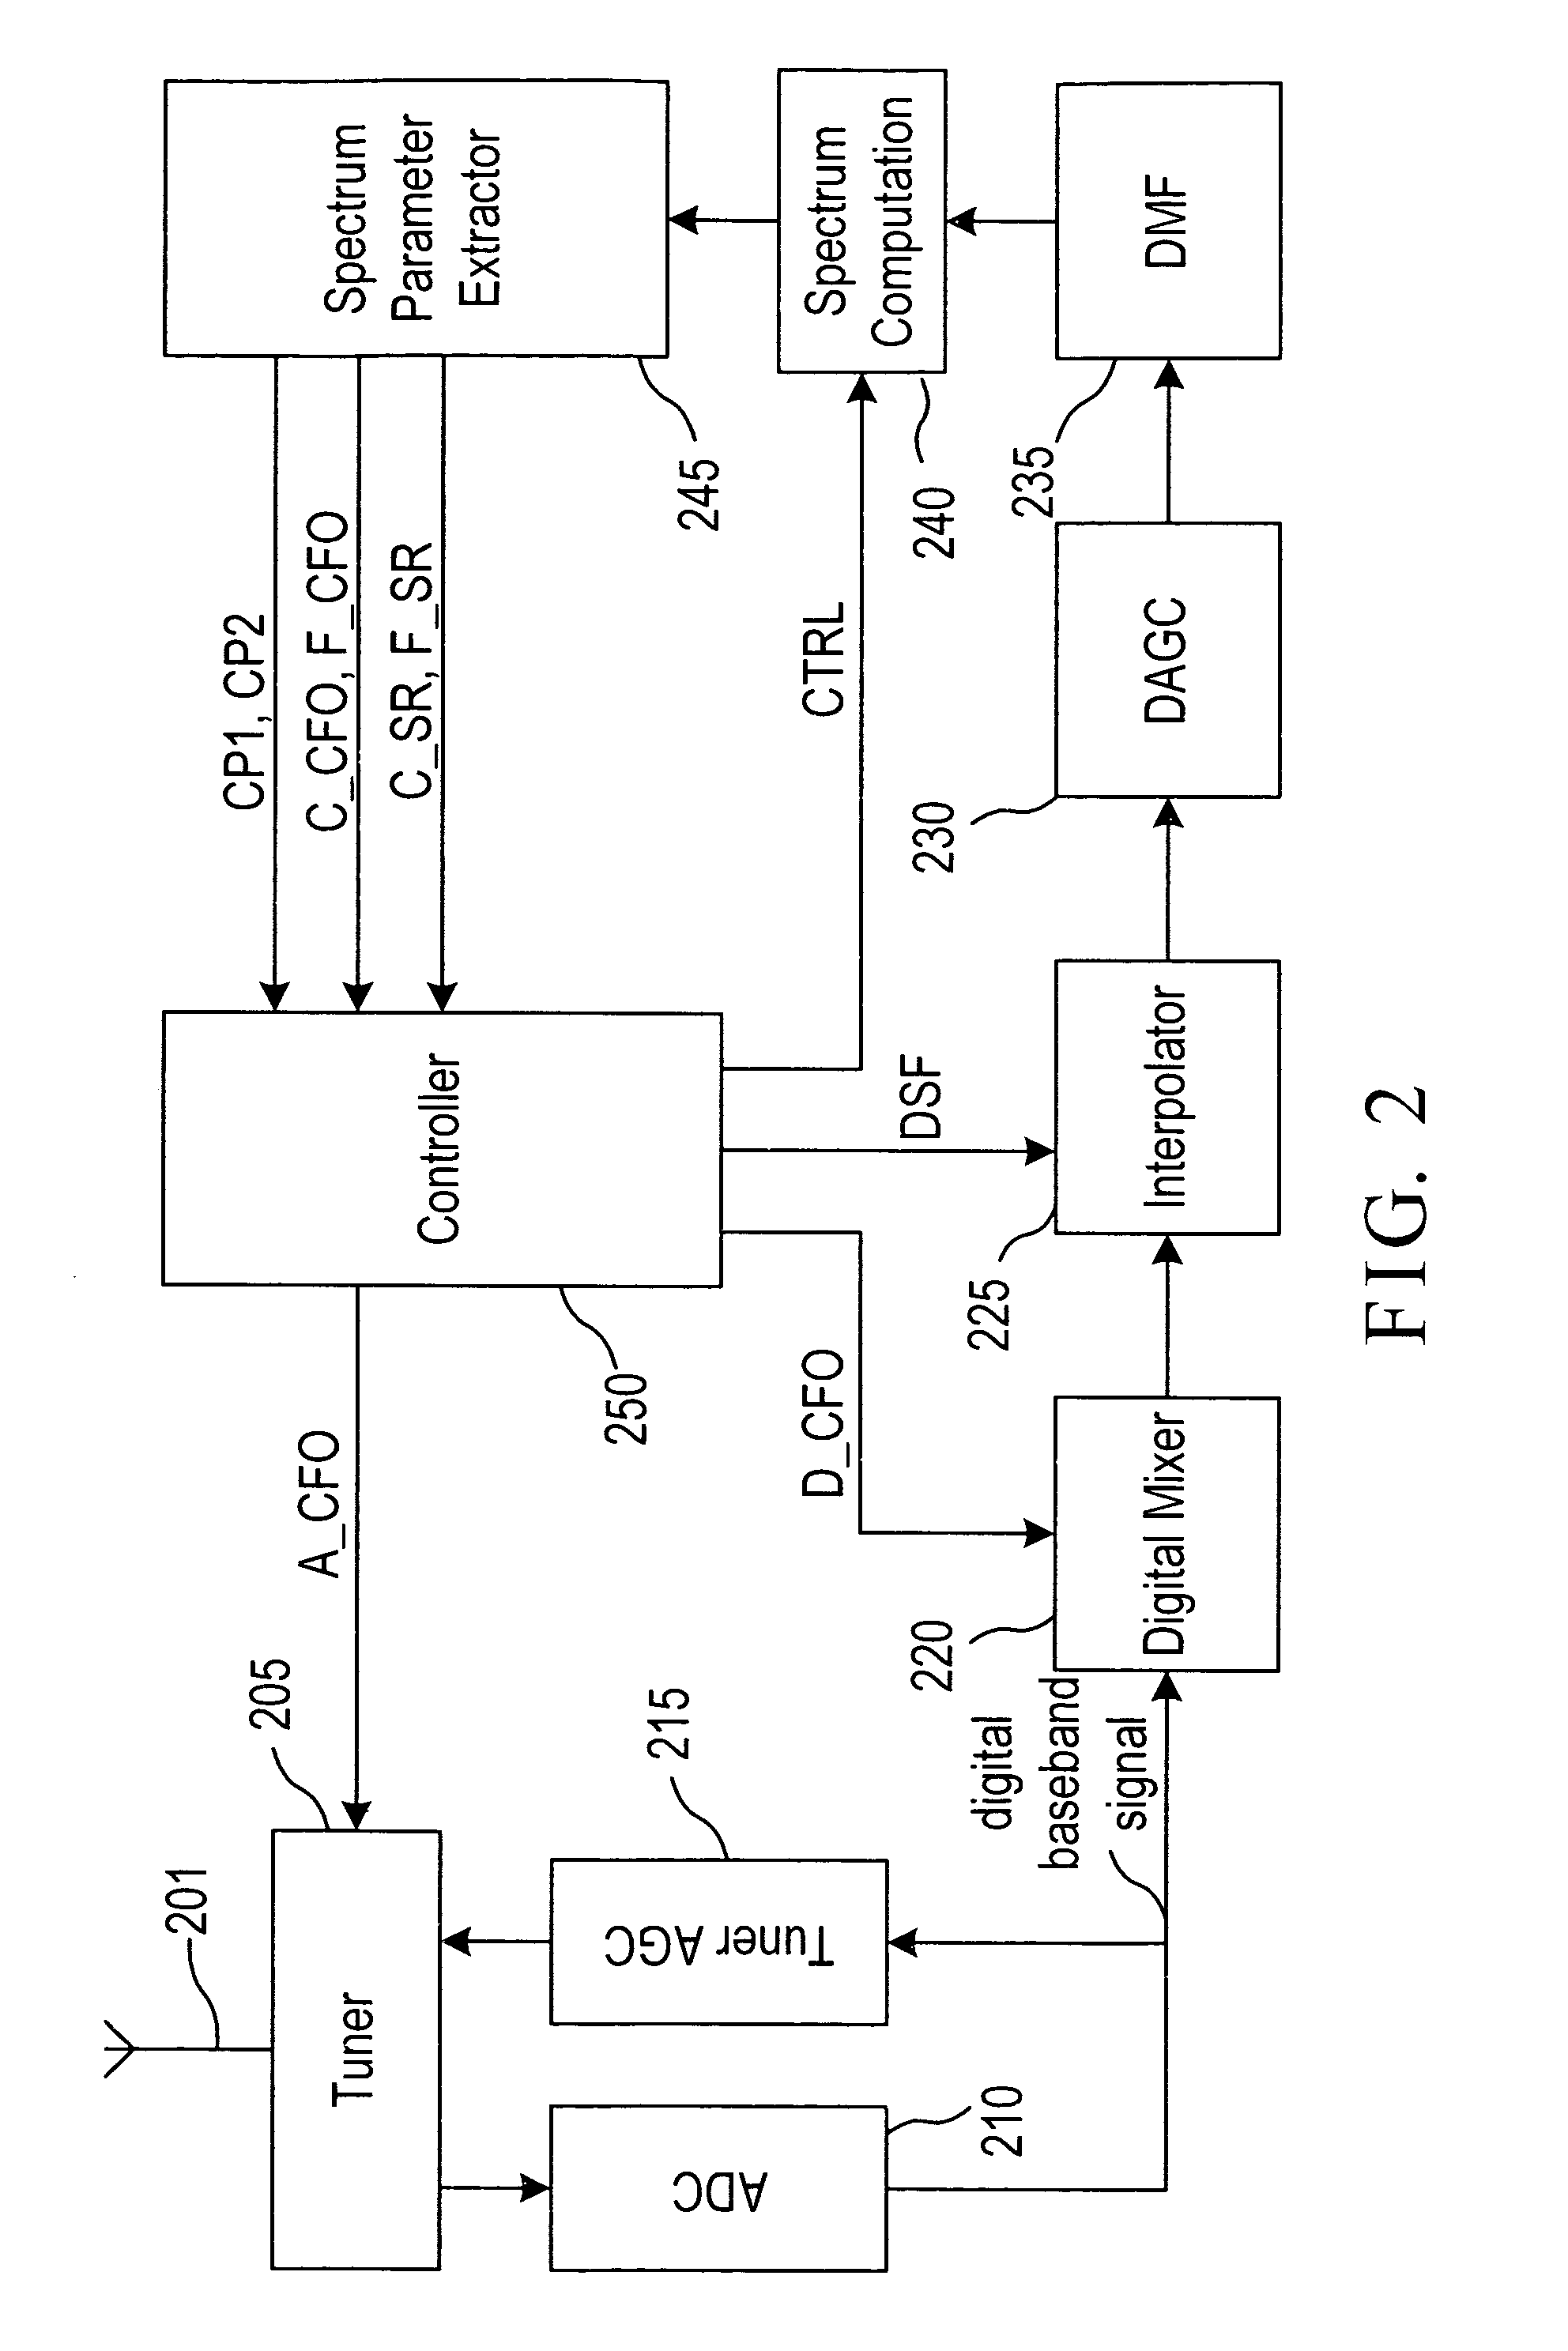 Method and device for aquiring a channel with frequency offset less than half symbol rate